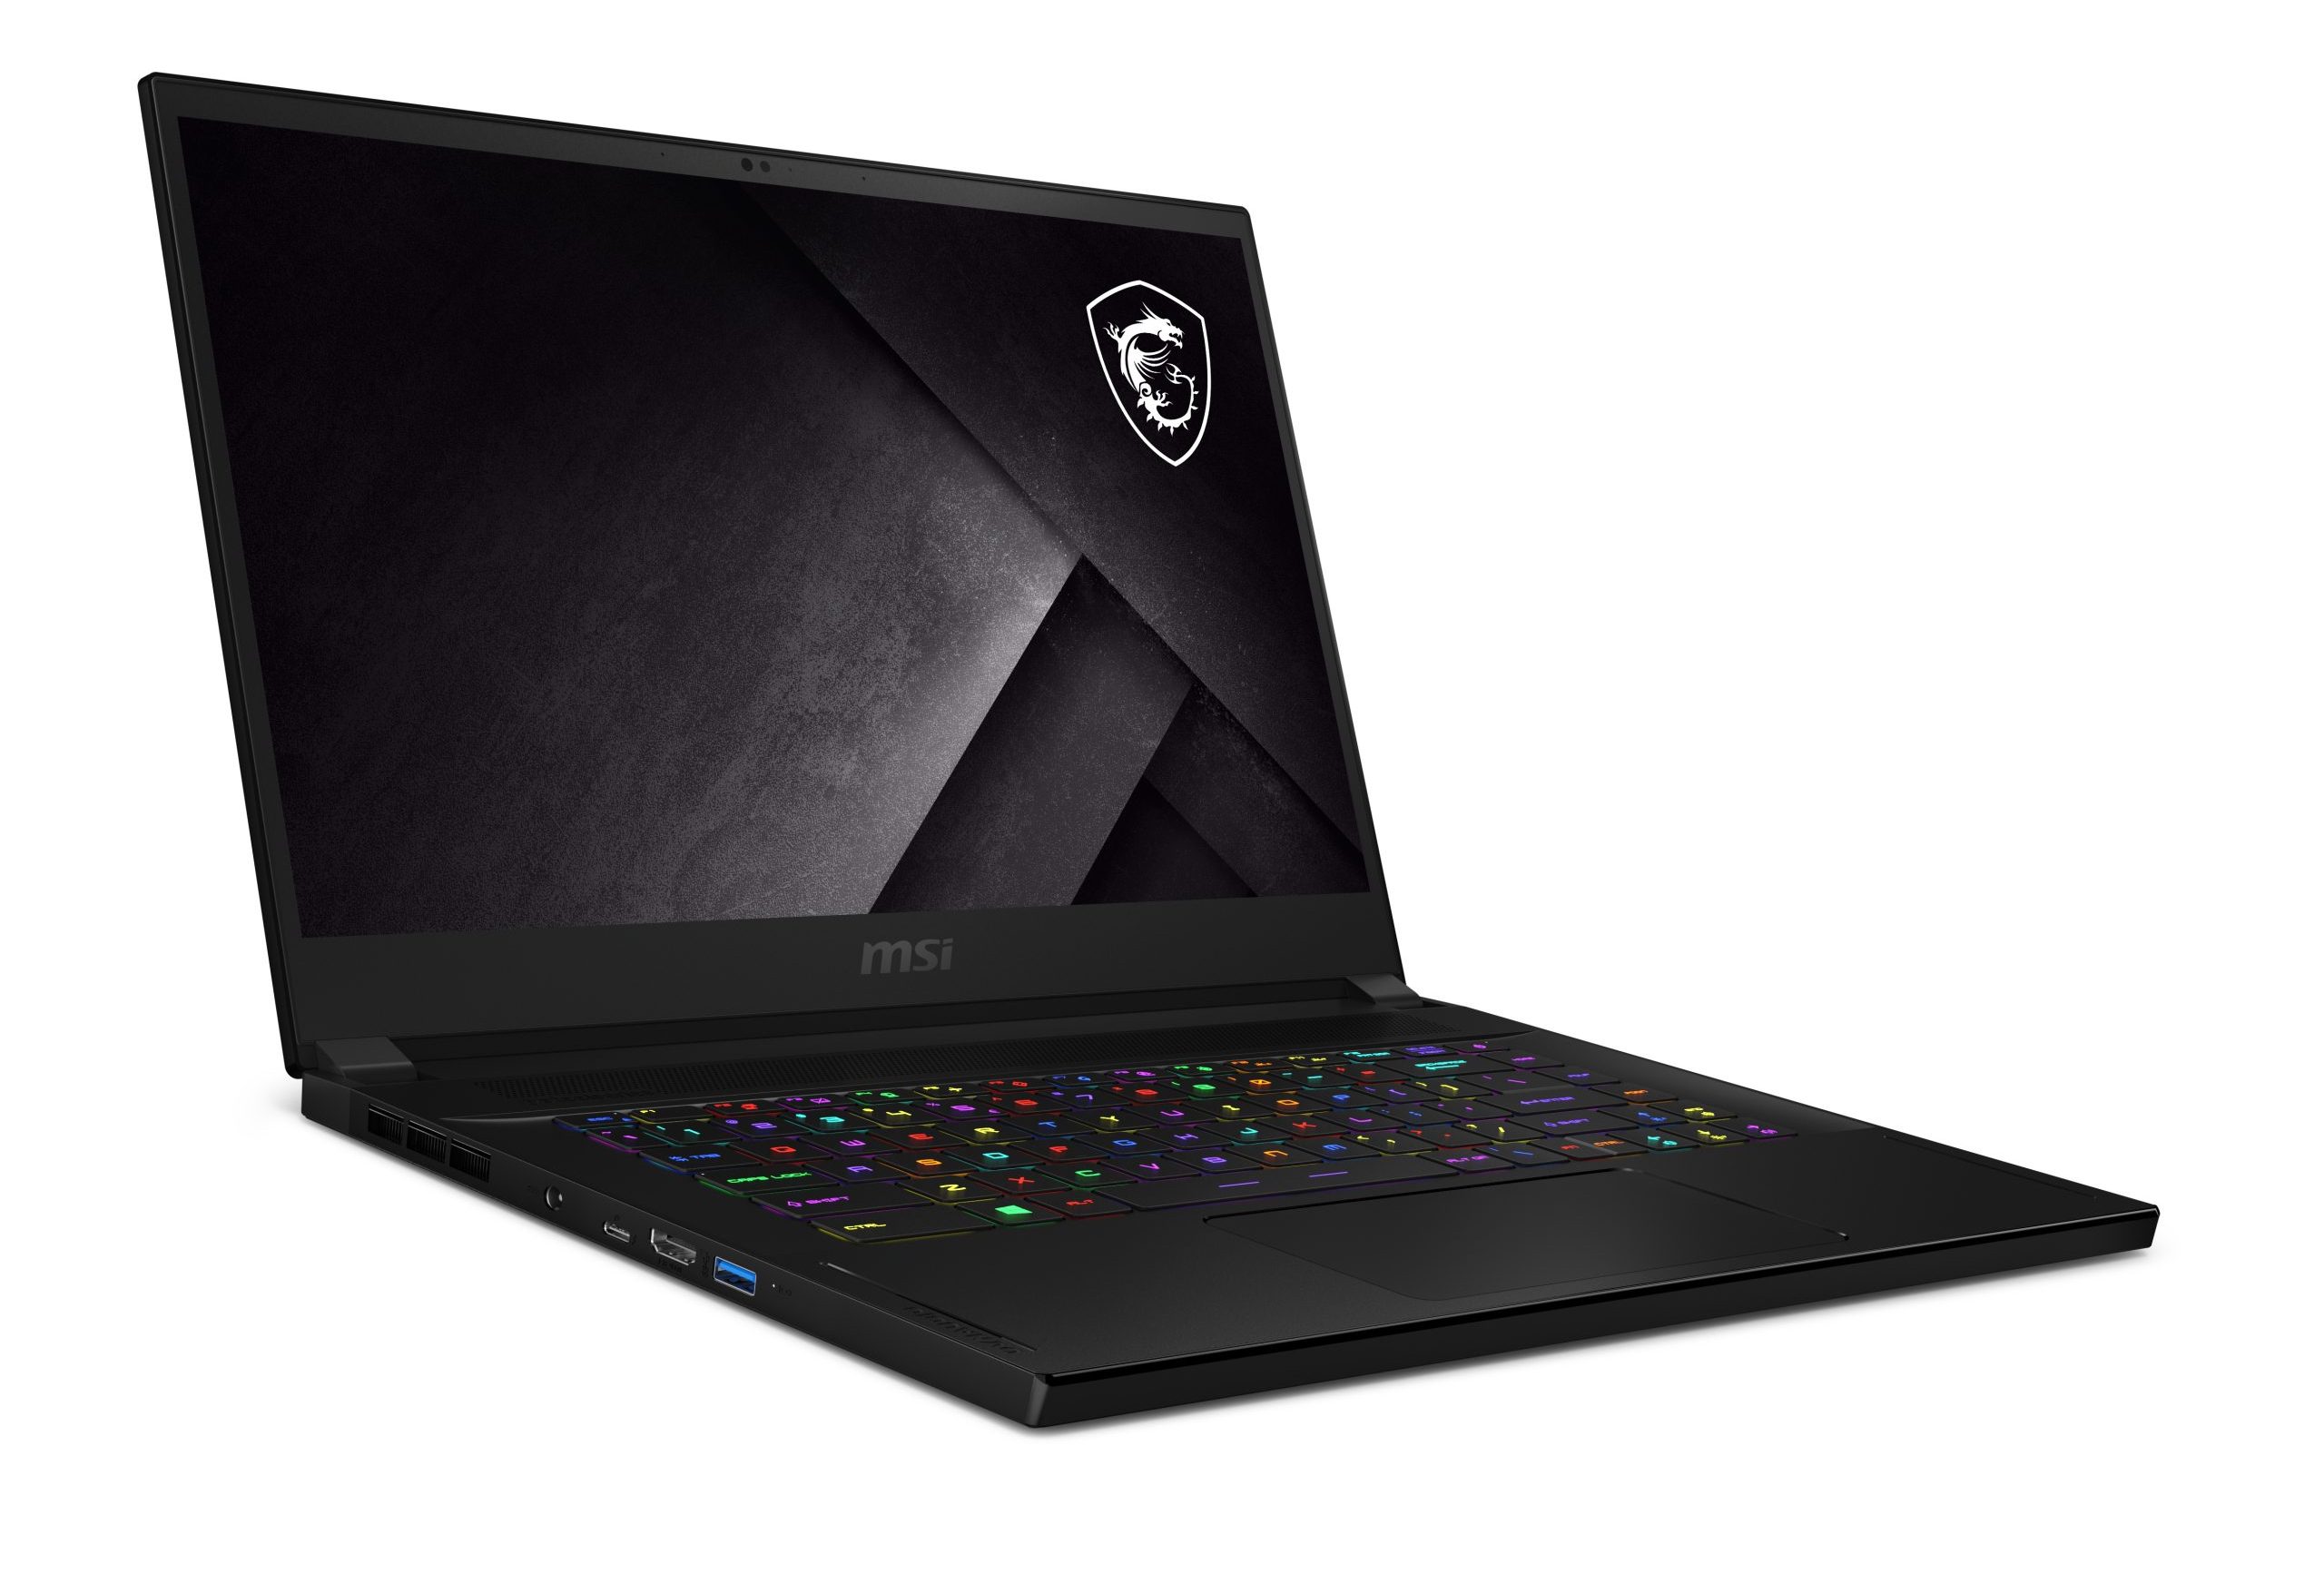 MSI NB GS66 Stealth photo03 scaled e1610580307405 CES 2021: MSI Roars In With Dragon Spirit In New Laptop Range